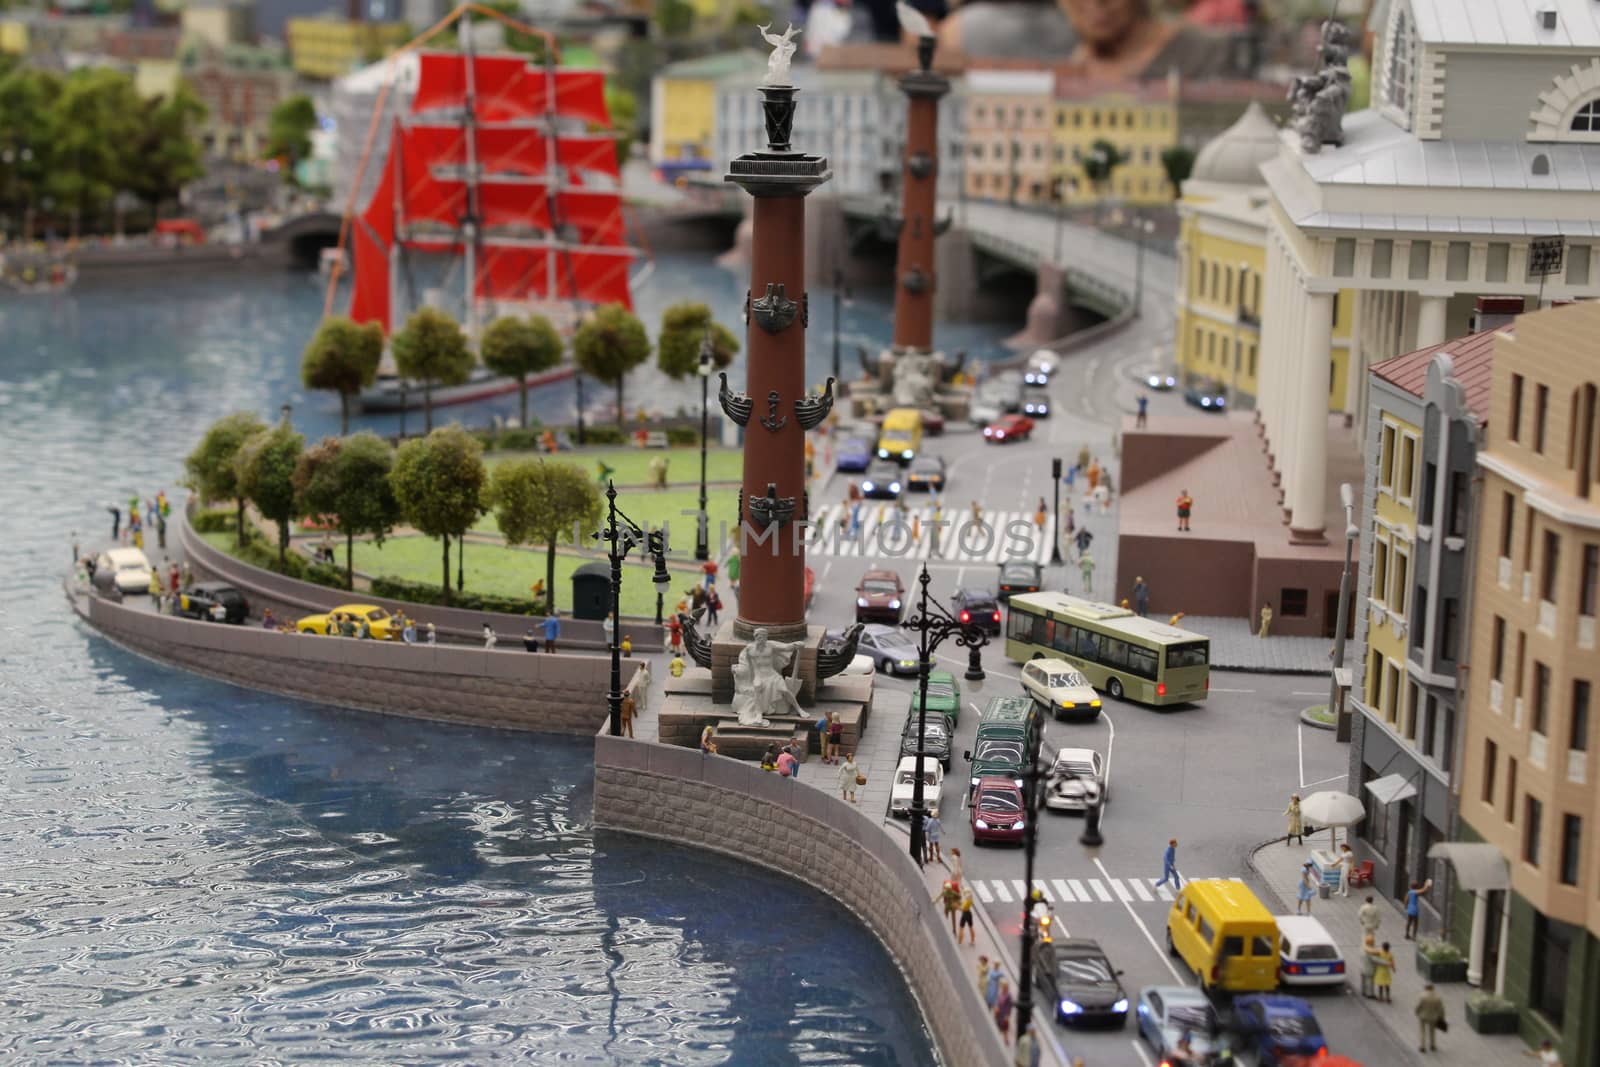 Toy city in a small size, very beautiful by SmirMaxStock